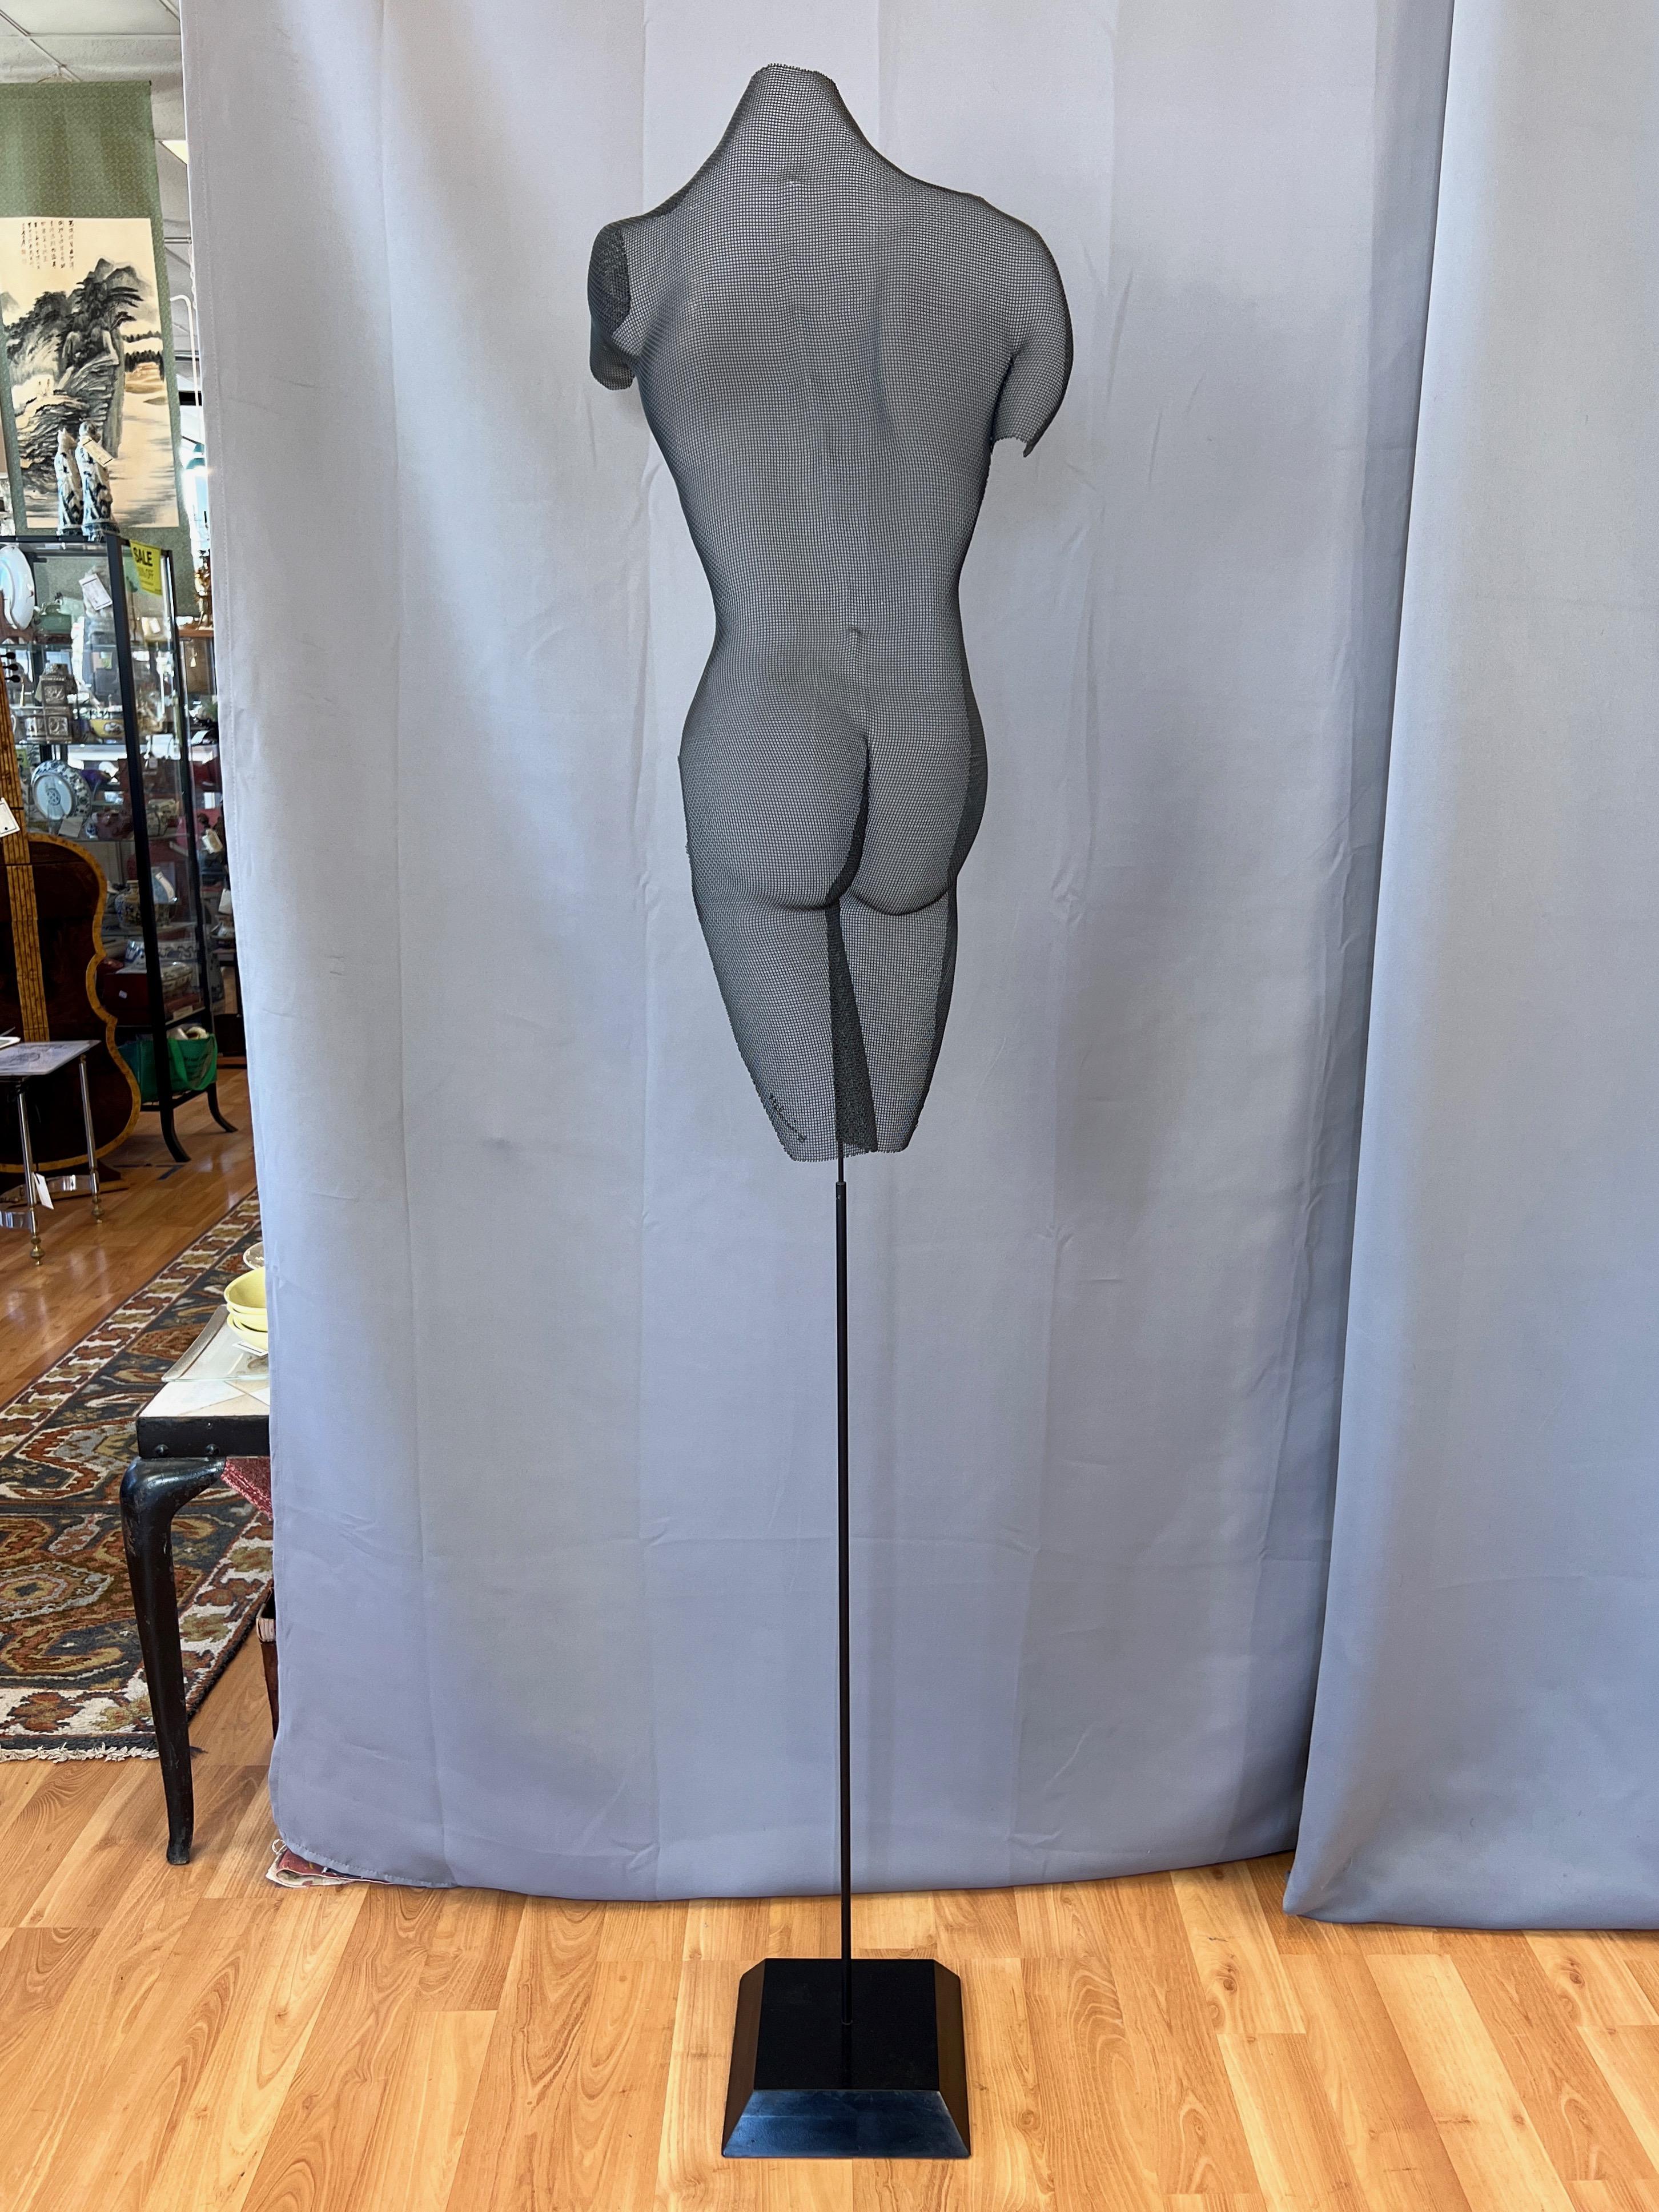 An entrancing 1998 “Melanie” wire mesh screen figural shadow sculpture on black wood base by American artist Randy Cooper.

Extremely well-executed nearly life-size feminine form is hand-shaped from a single piece of fine-gauge Czechoslovakian wire